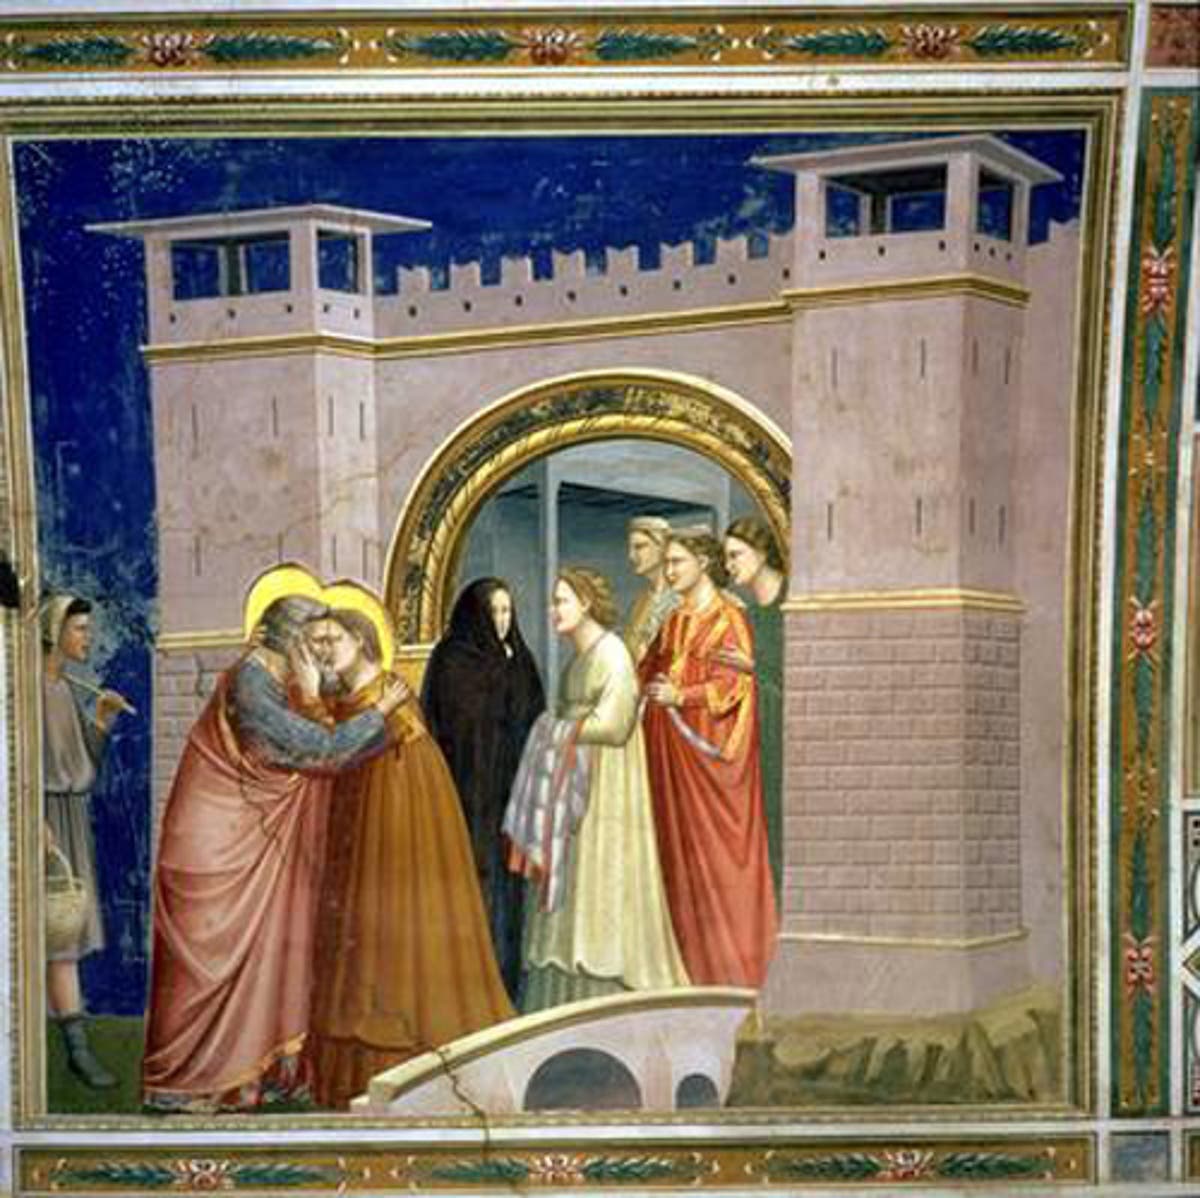 Bondone, di Giotto: The Meeting at the Golden Gate (1305) | The